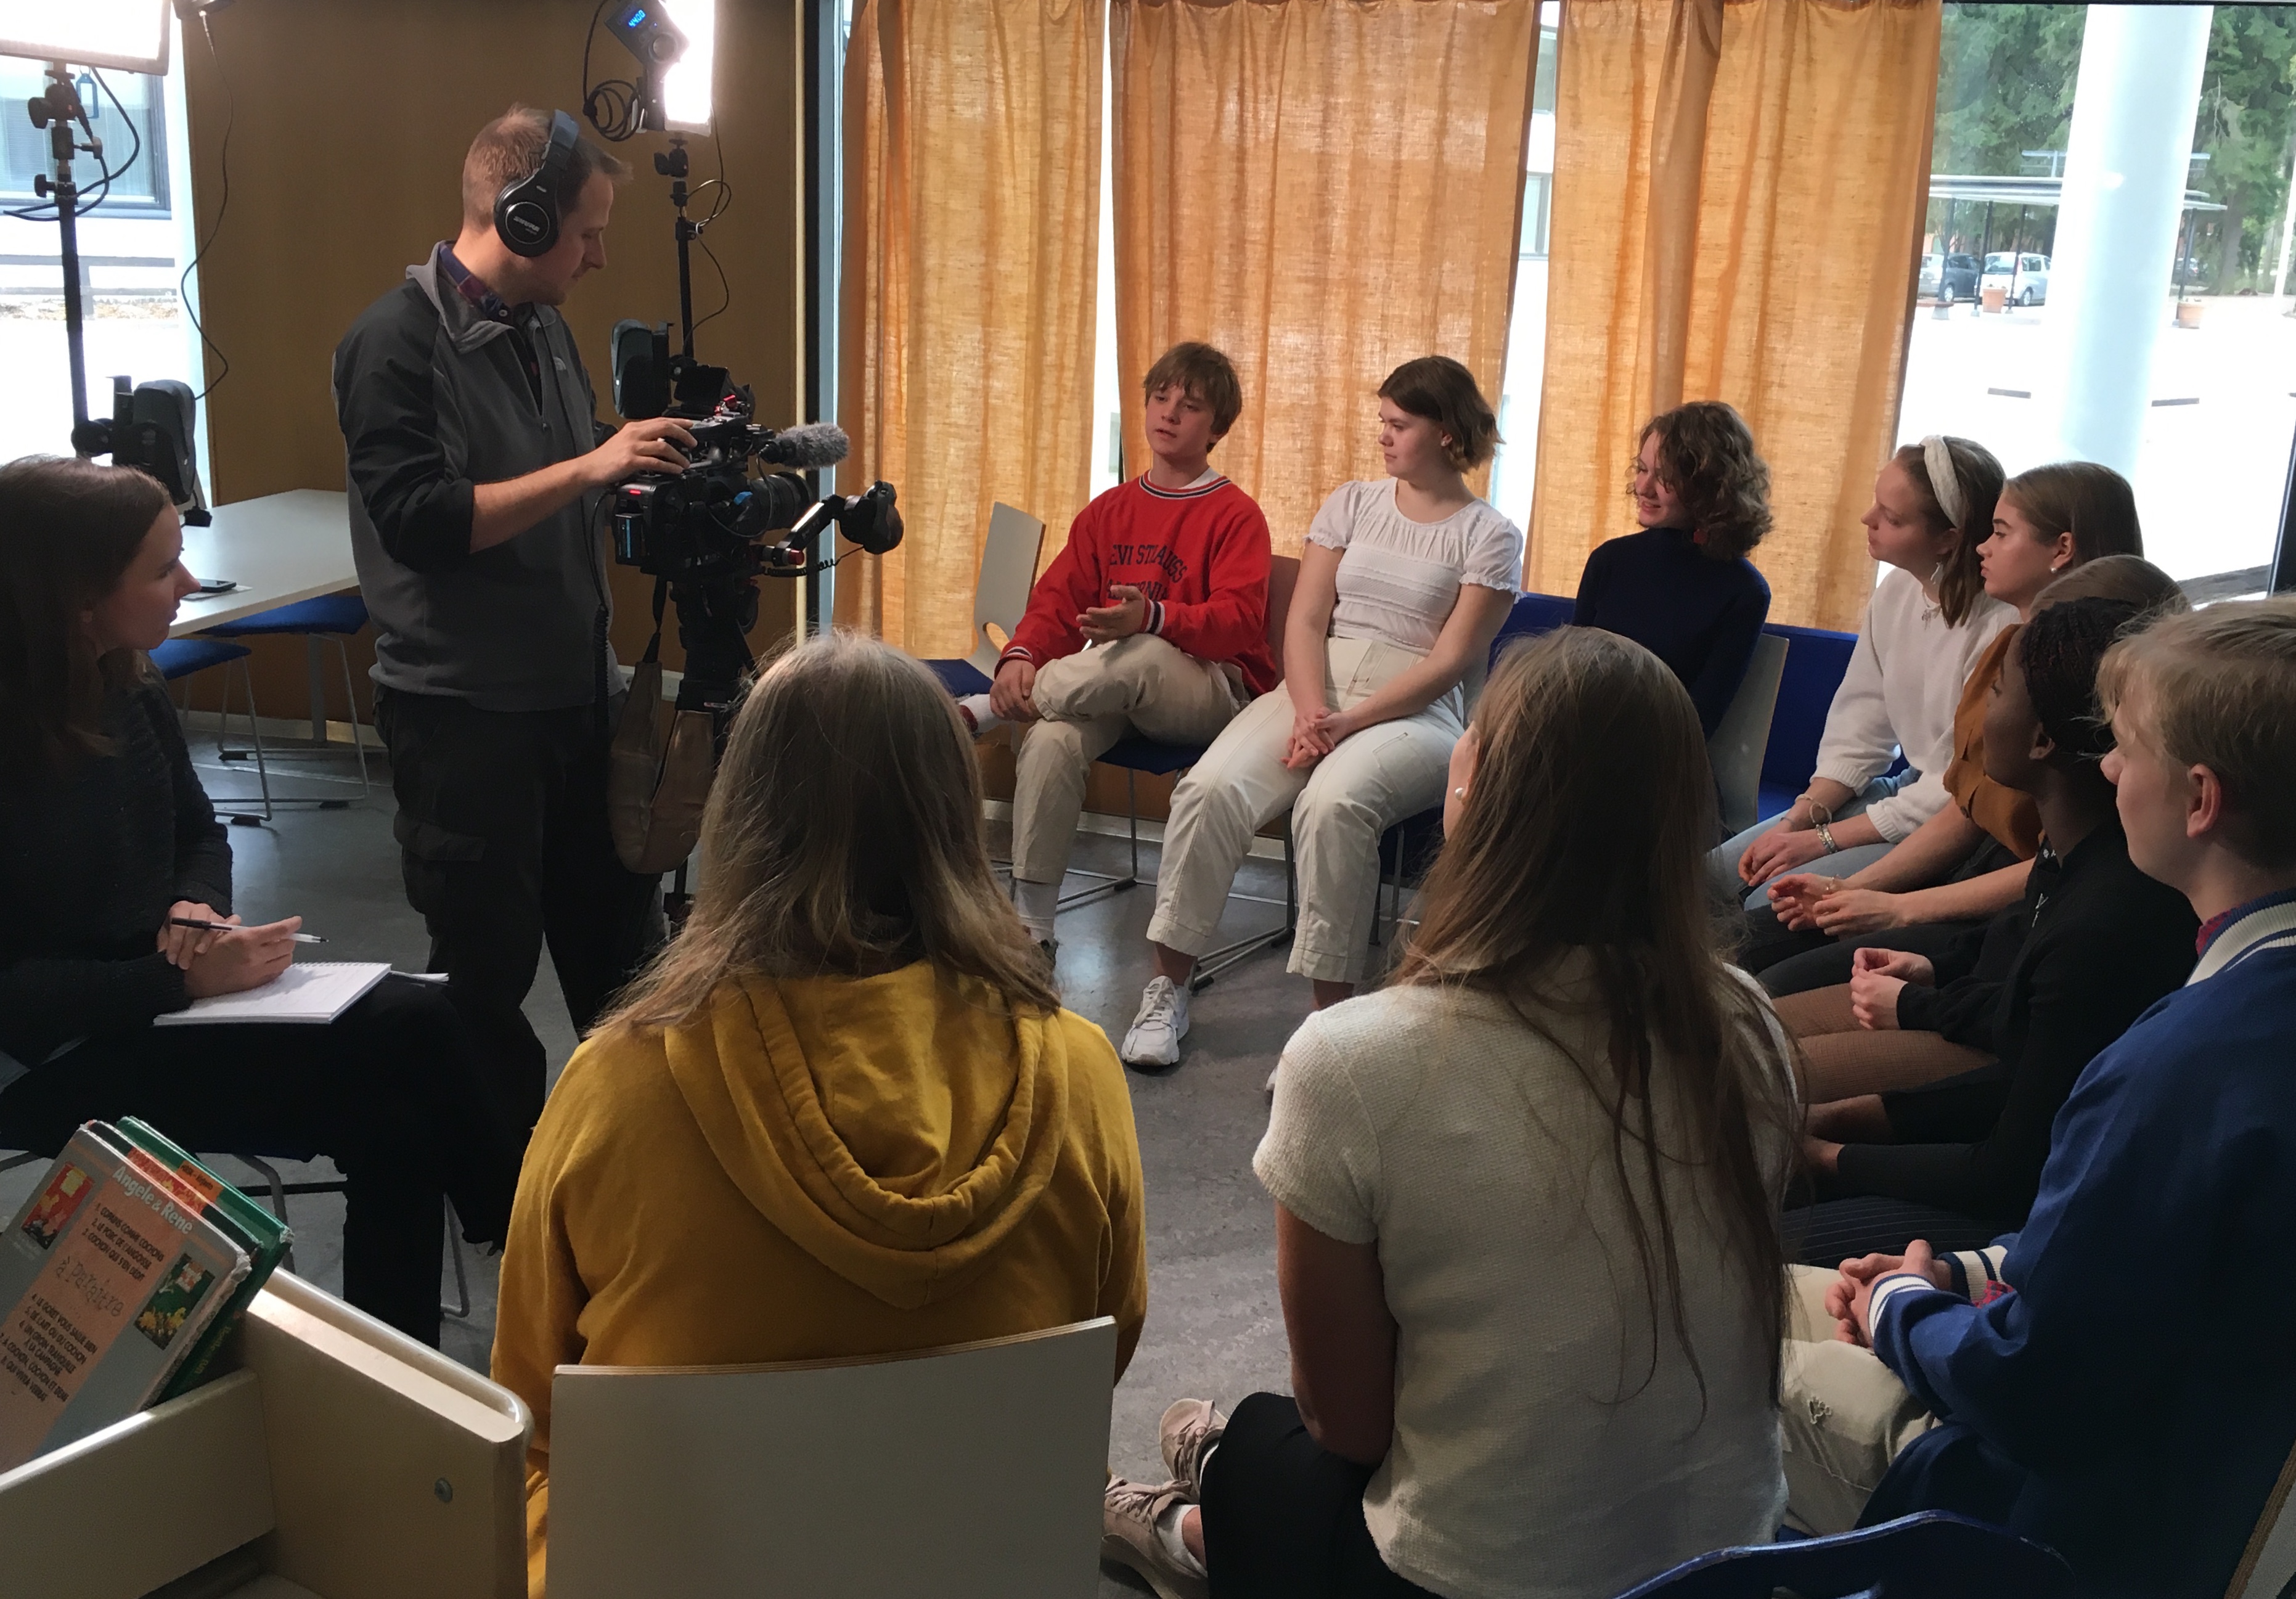 CNN reporters visited the French Finnish school of Helsinki